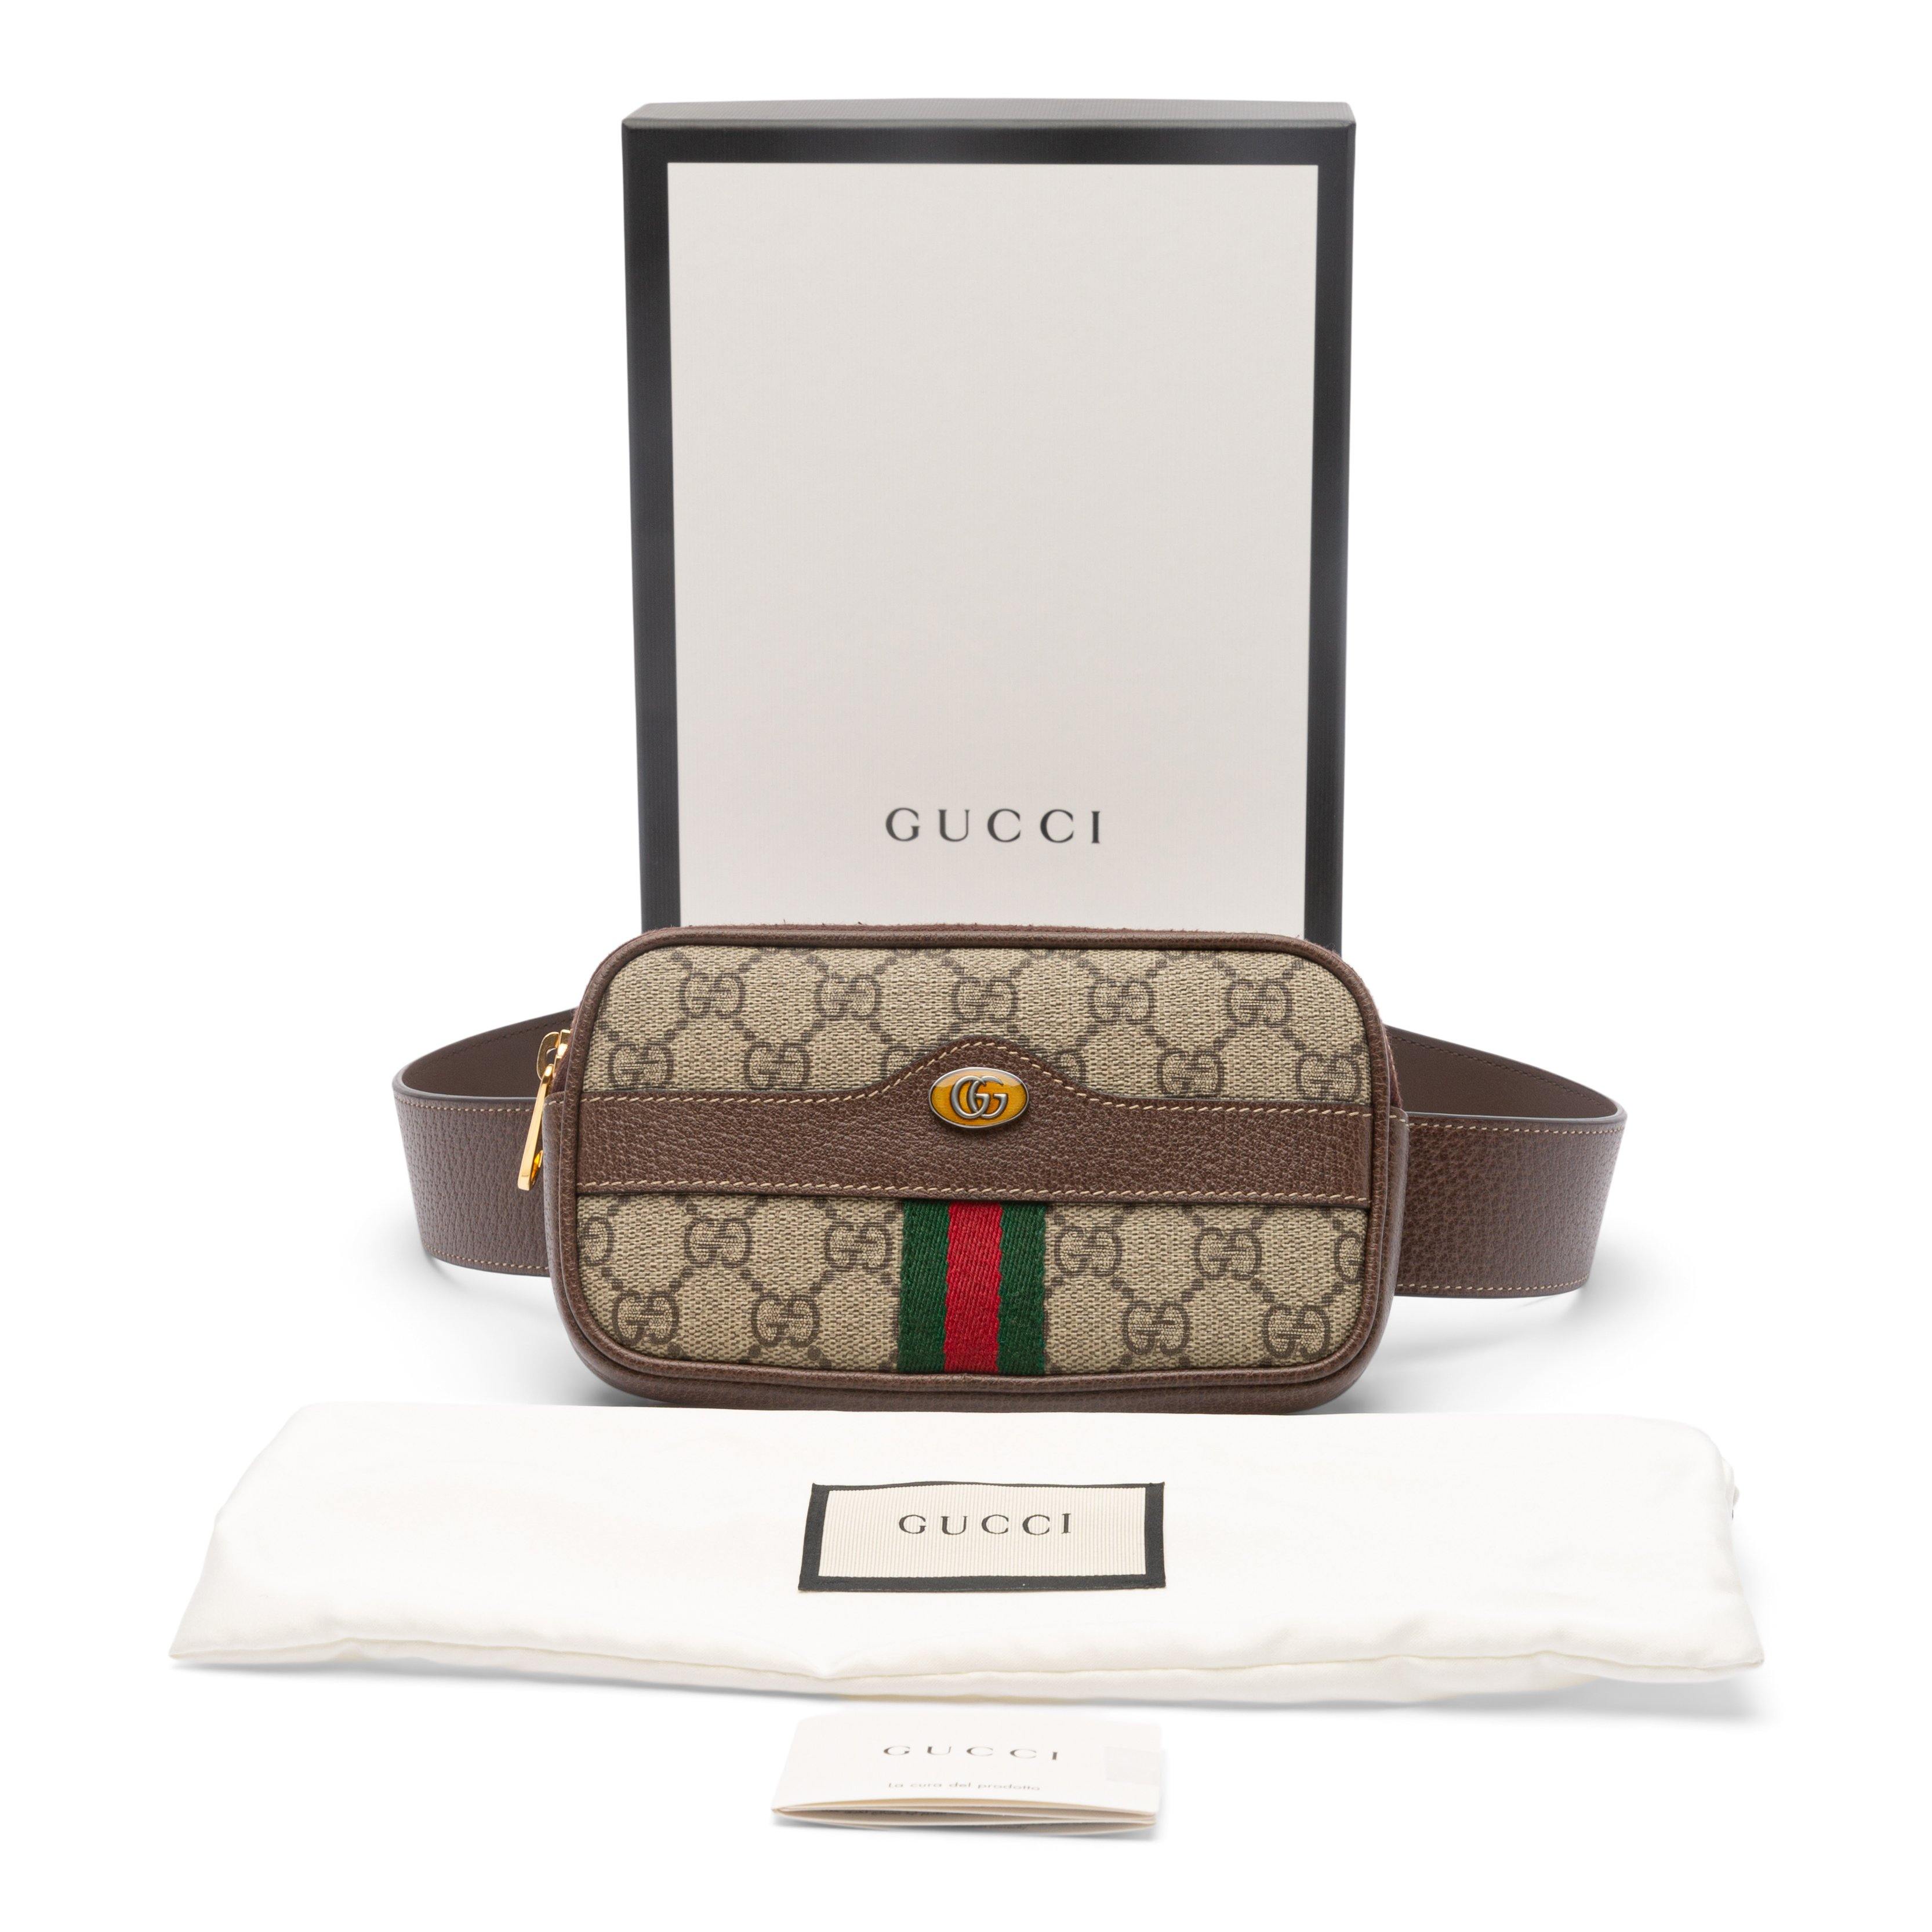 New Authentic Gucci Ophidia GG Supreme Canvas Belt Bag SIZE 75 519308